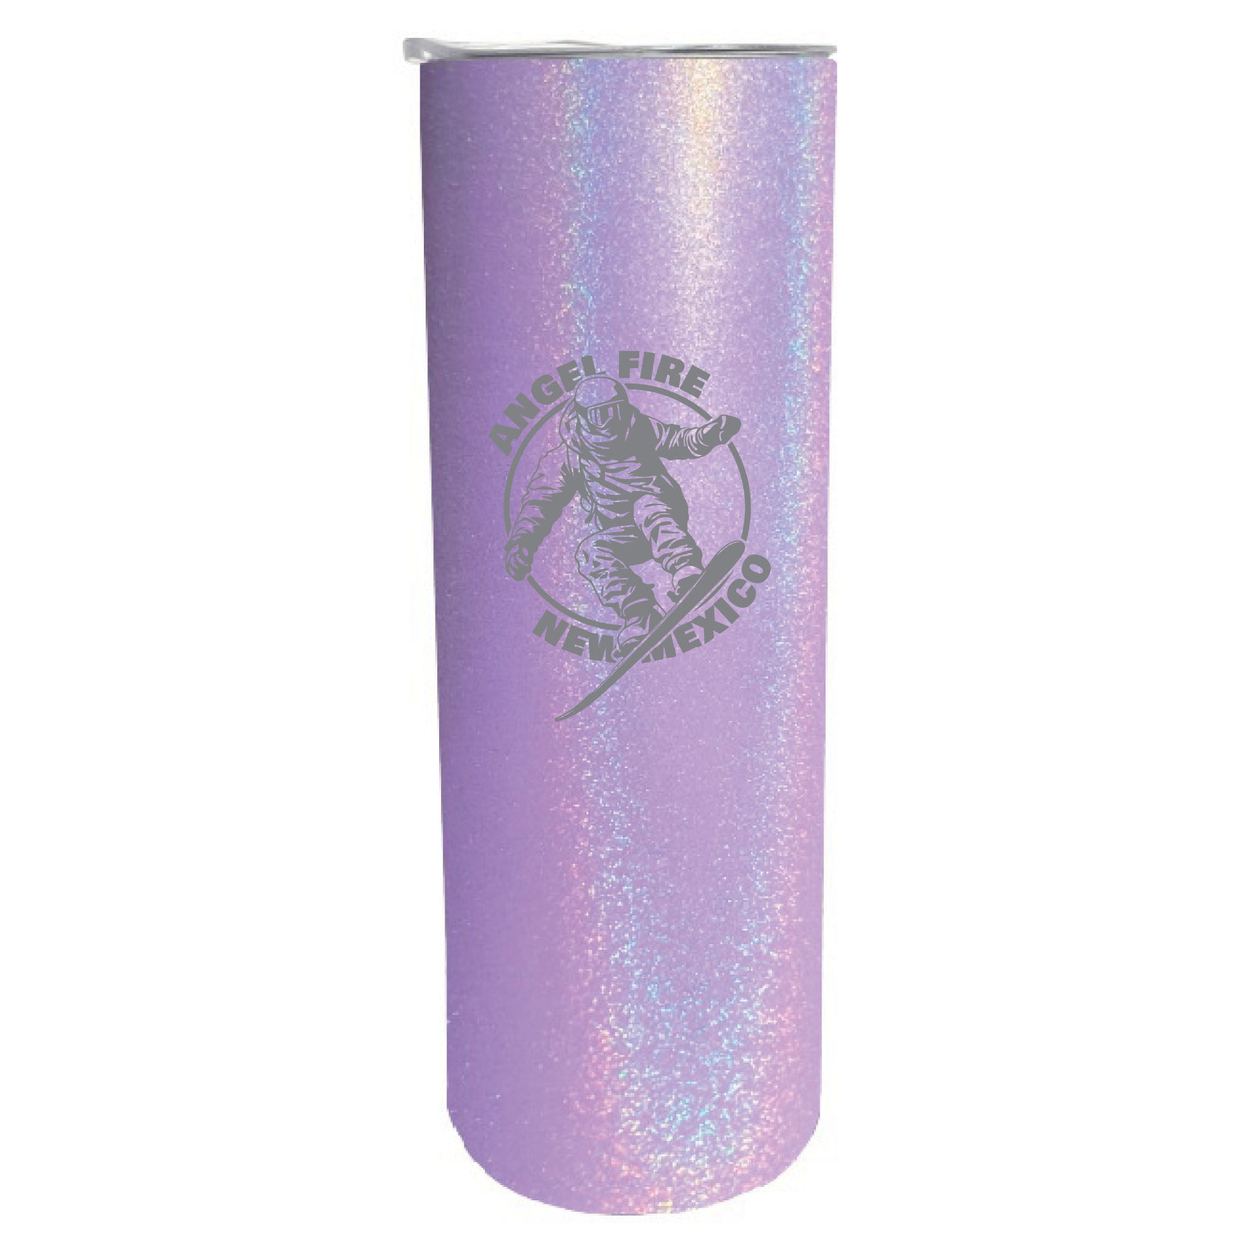 Angel Fire New Mexico Souvenir 20 Oz Engraved Insulated Stainless Steel Skinny Tumbler - Purple Glitter,,Single Unit